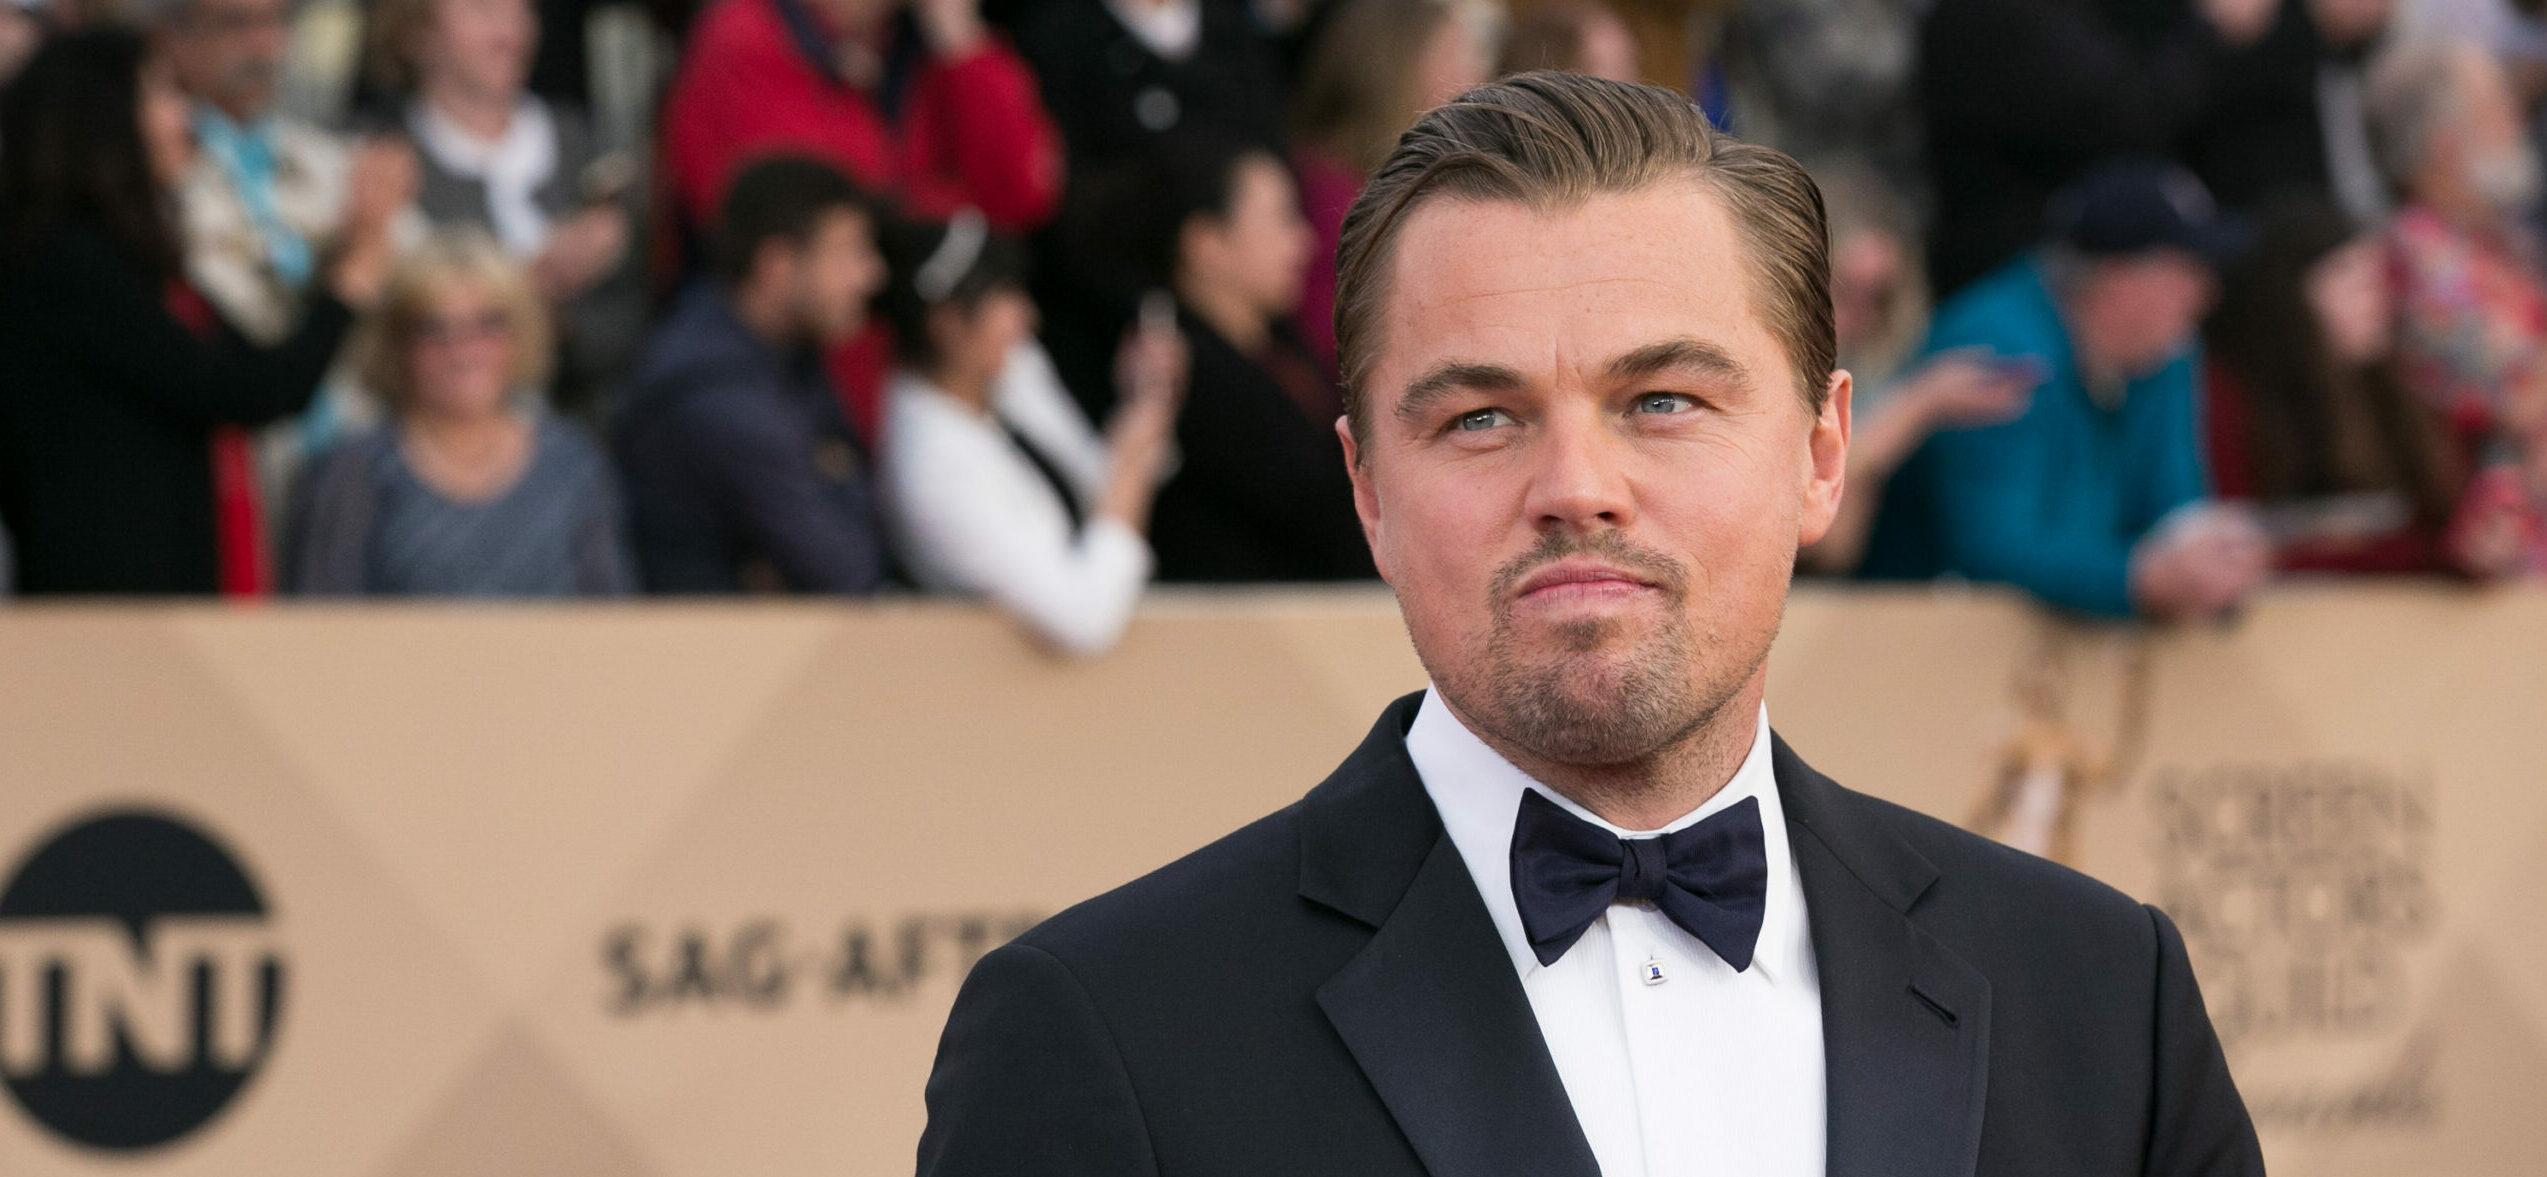 Leonardo DiCaprio at the 22nd Annual Screen Actors Guild Awards